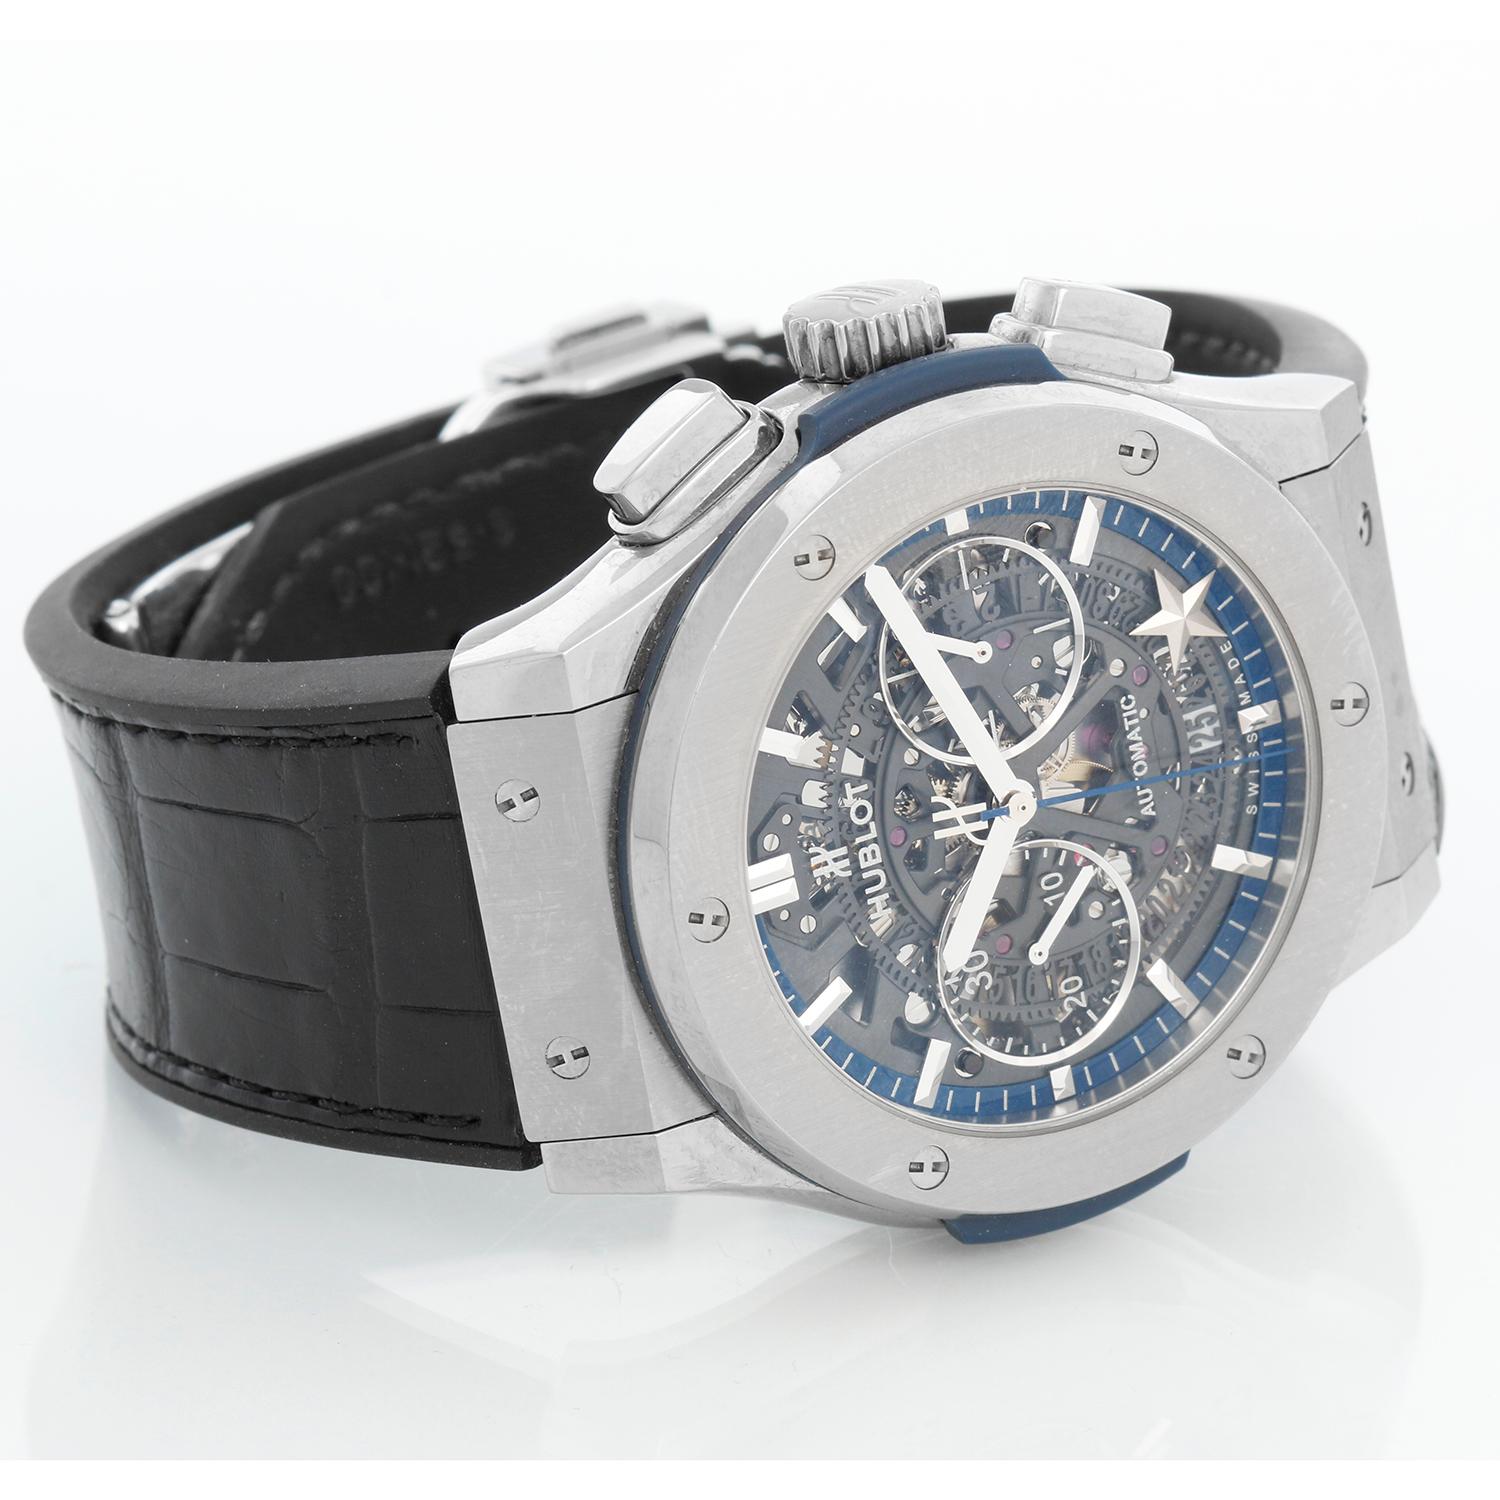 Hublot Classic Fusion Dallas Cowboys Special Edition Men's Watch 525.NX.0179.LR.DCW14 - Automatic winding, chronograph. Polished titanium with satin finish ( 45 mm ). Skeleton dial with rhodium counter ring. Dallas Cowboys Start at 5 o'clock. Black